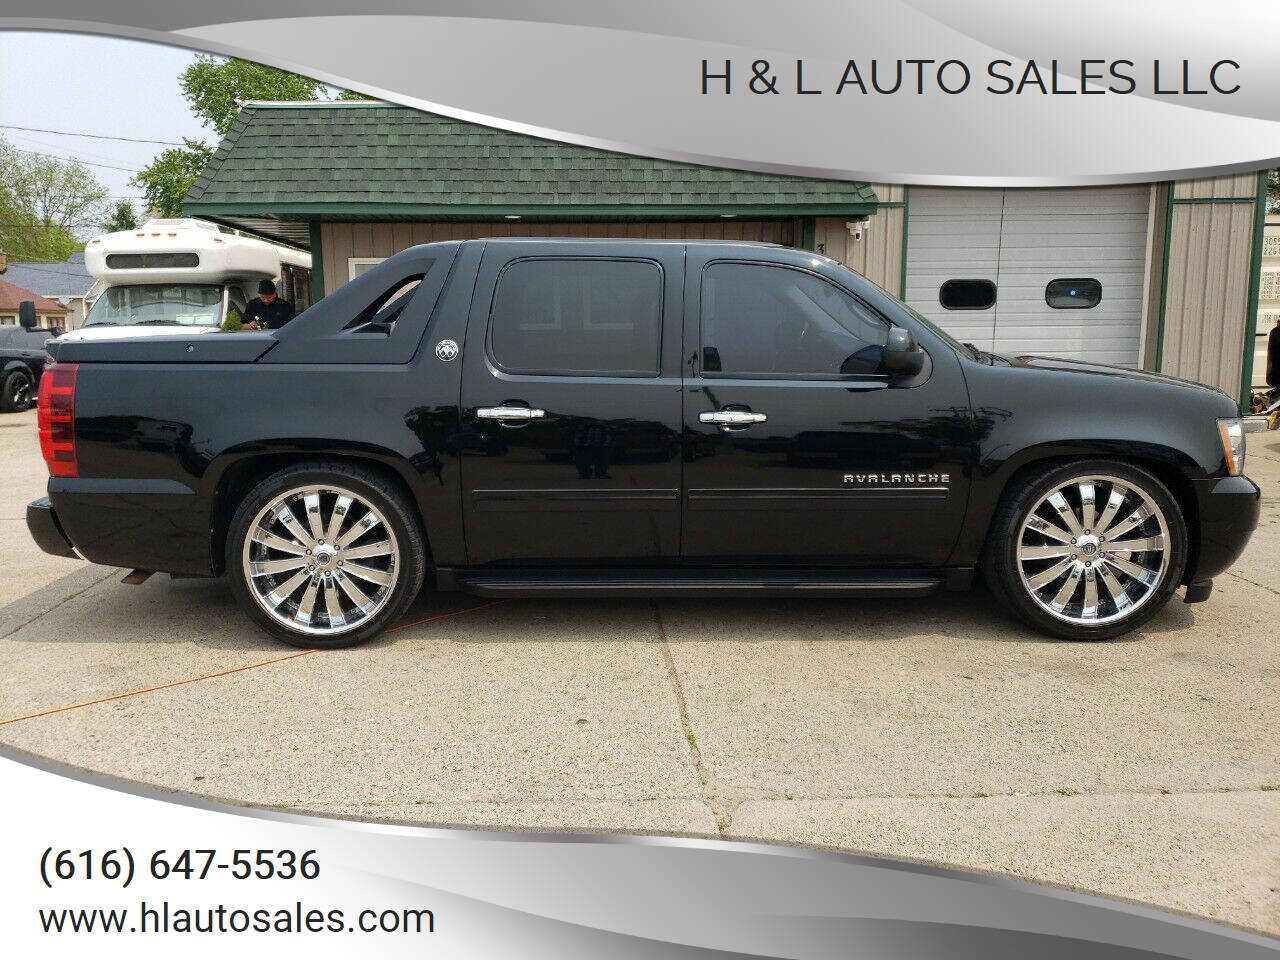 Used 2013 Chevrolet Avalanche LTZ 4WD for Sale in Wyoming MI 49509 Direct  Auto Source - Wyoming